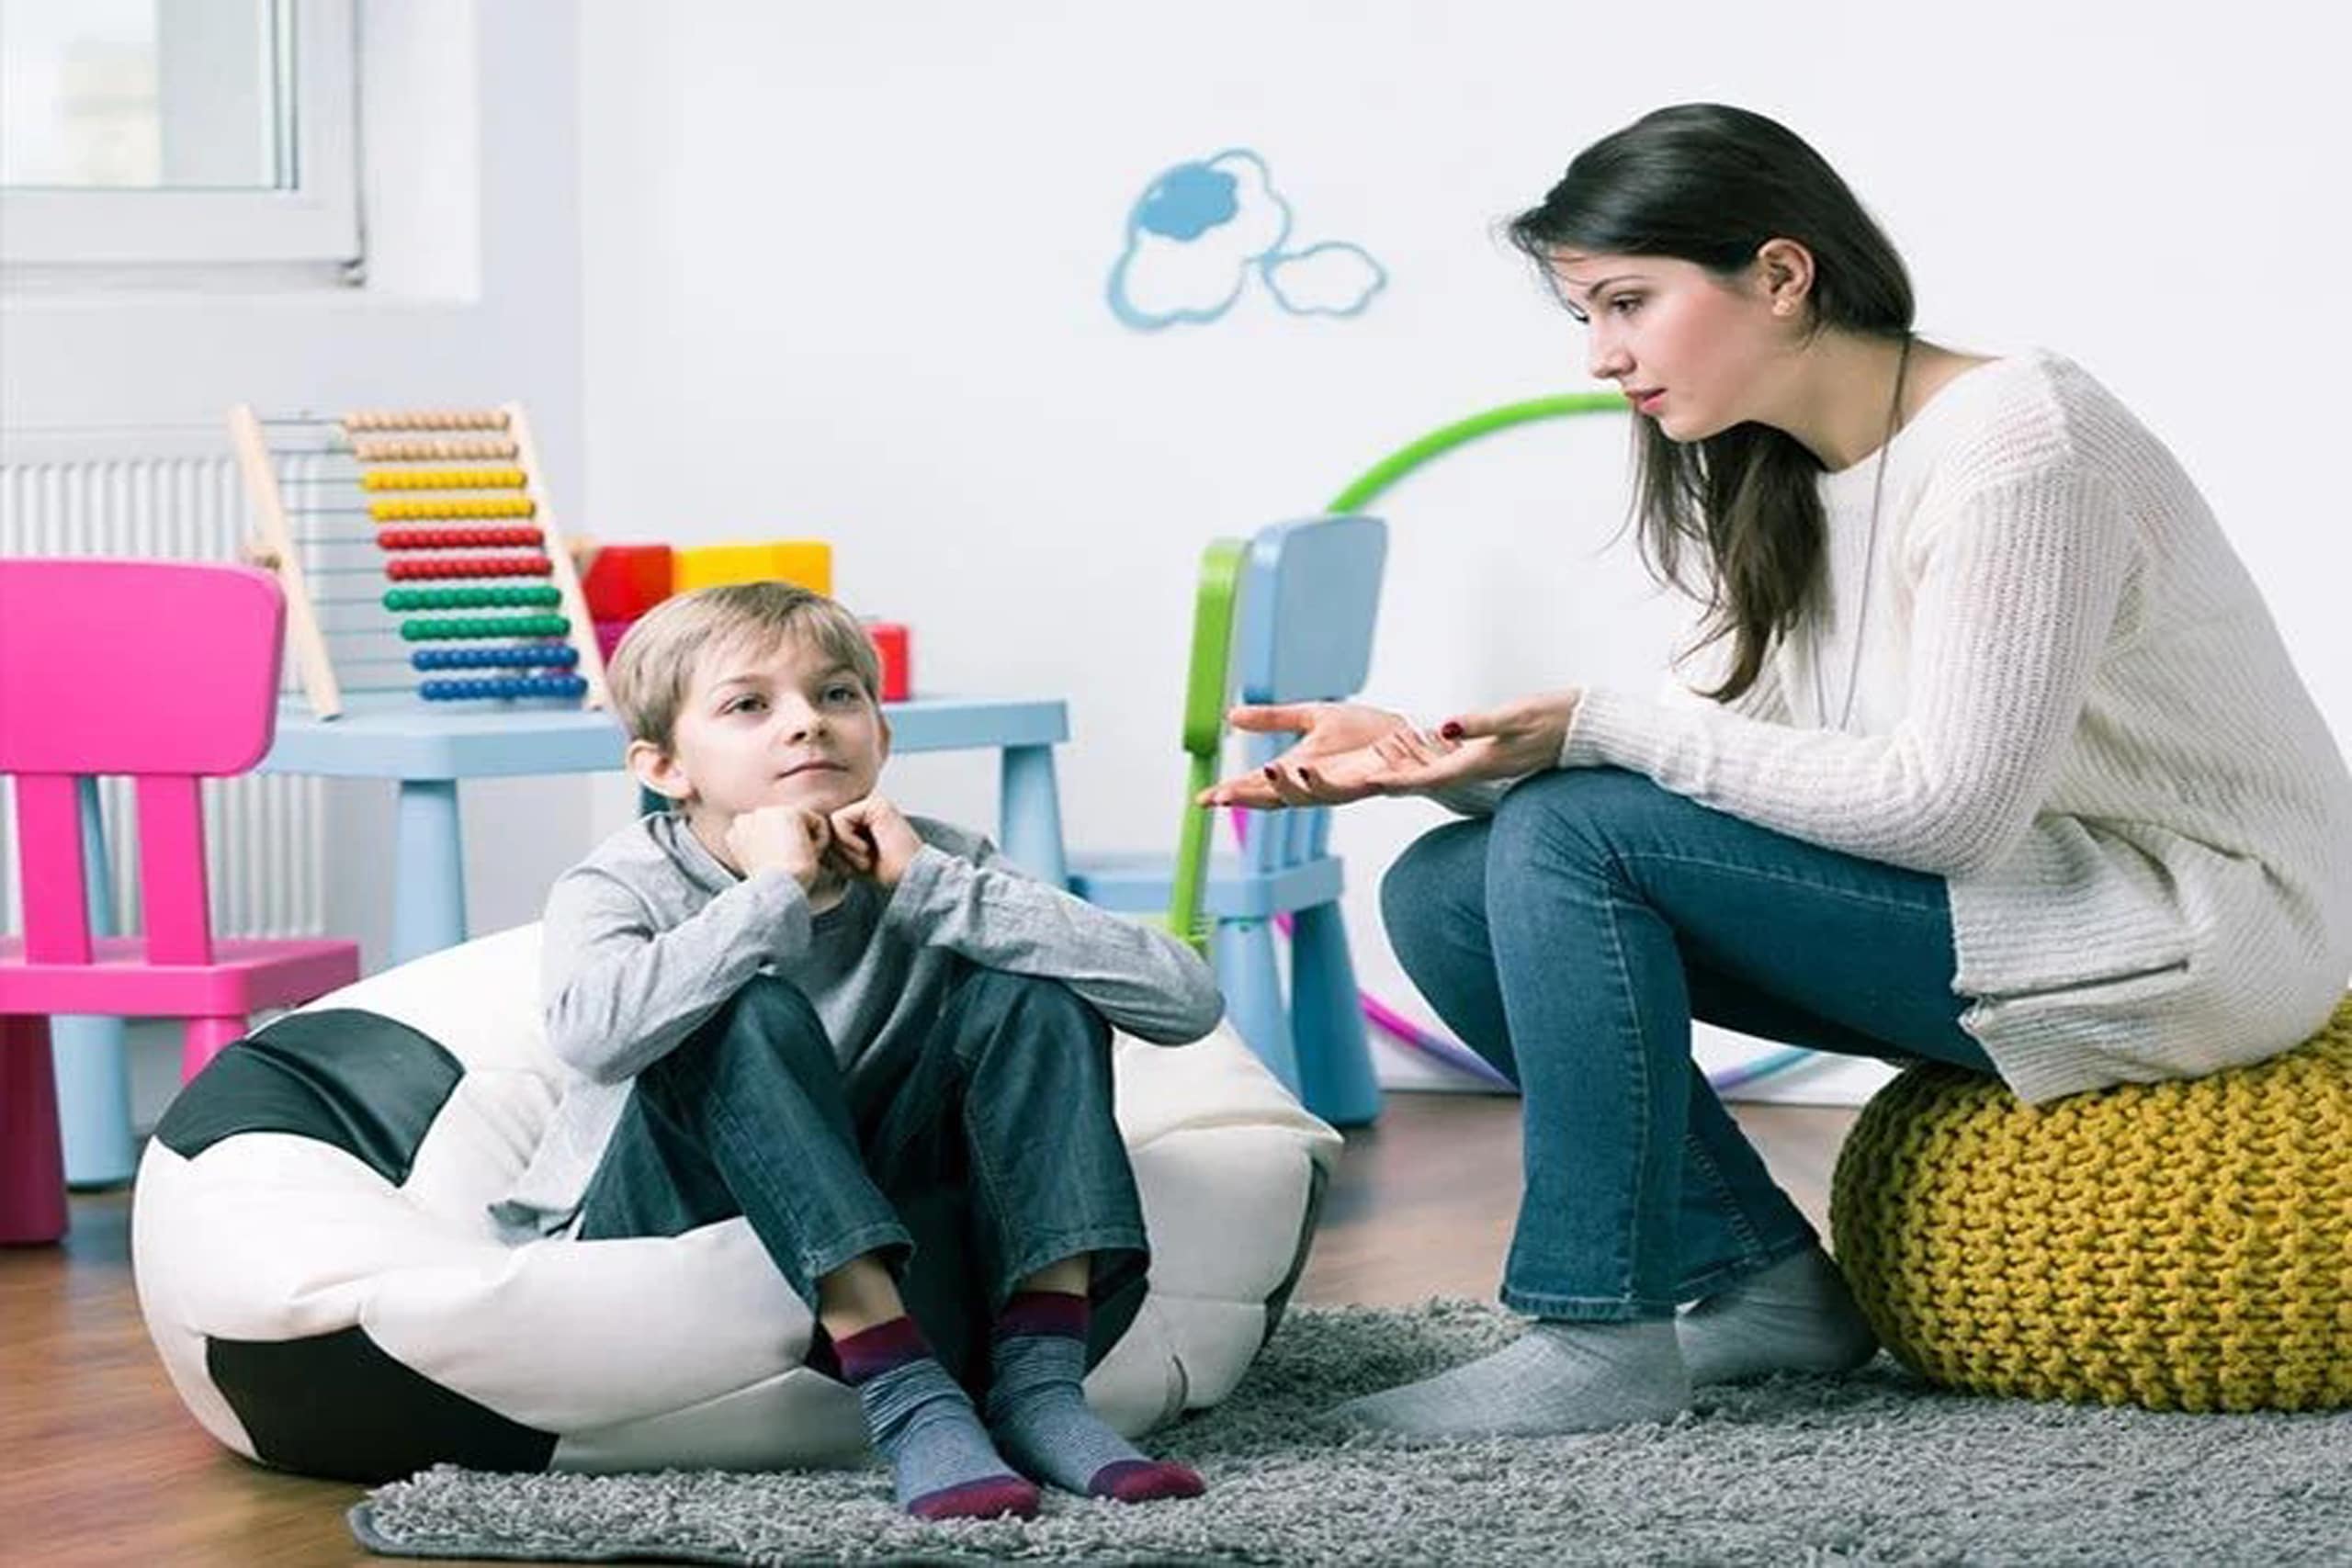 Child and Adolescent Counseling- Redeemed Life Counseling